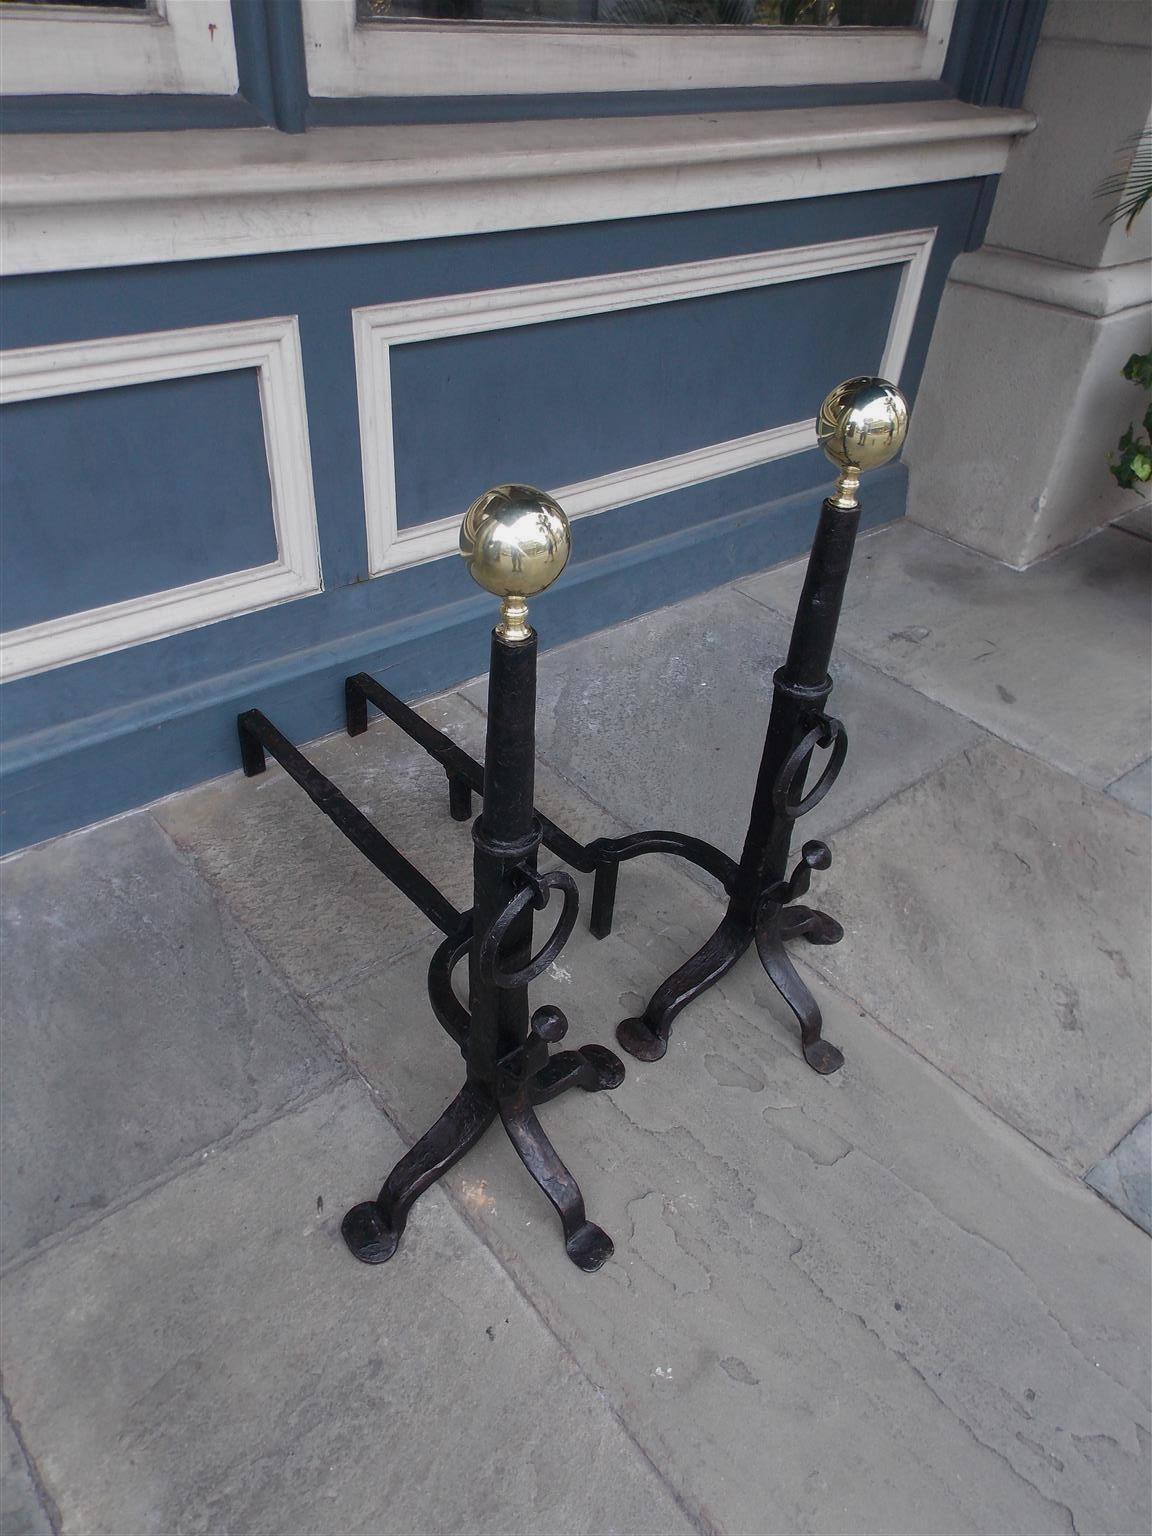 Pair of American wrought iron and brass ball top andirons with circular turned ringed columns, decorative centered rings, flanking spit hooks, curvature dog legs, and terminating on scrolled tripod penny feet, Early 19th century. Centered columns